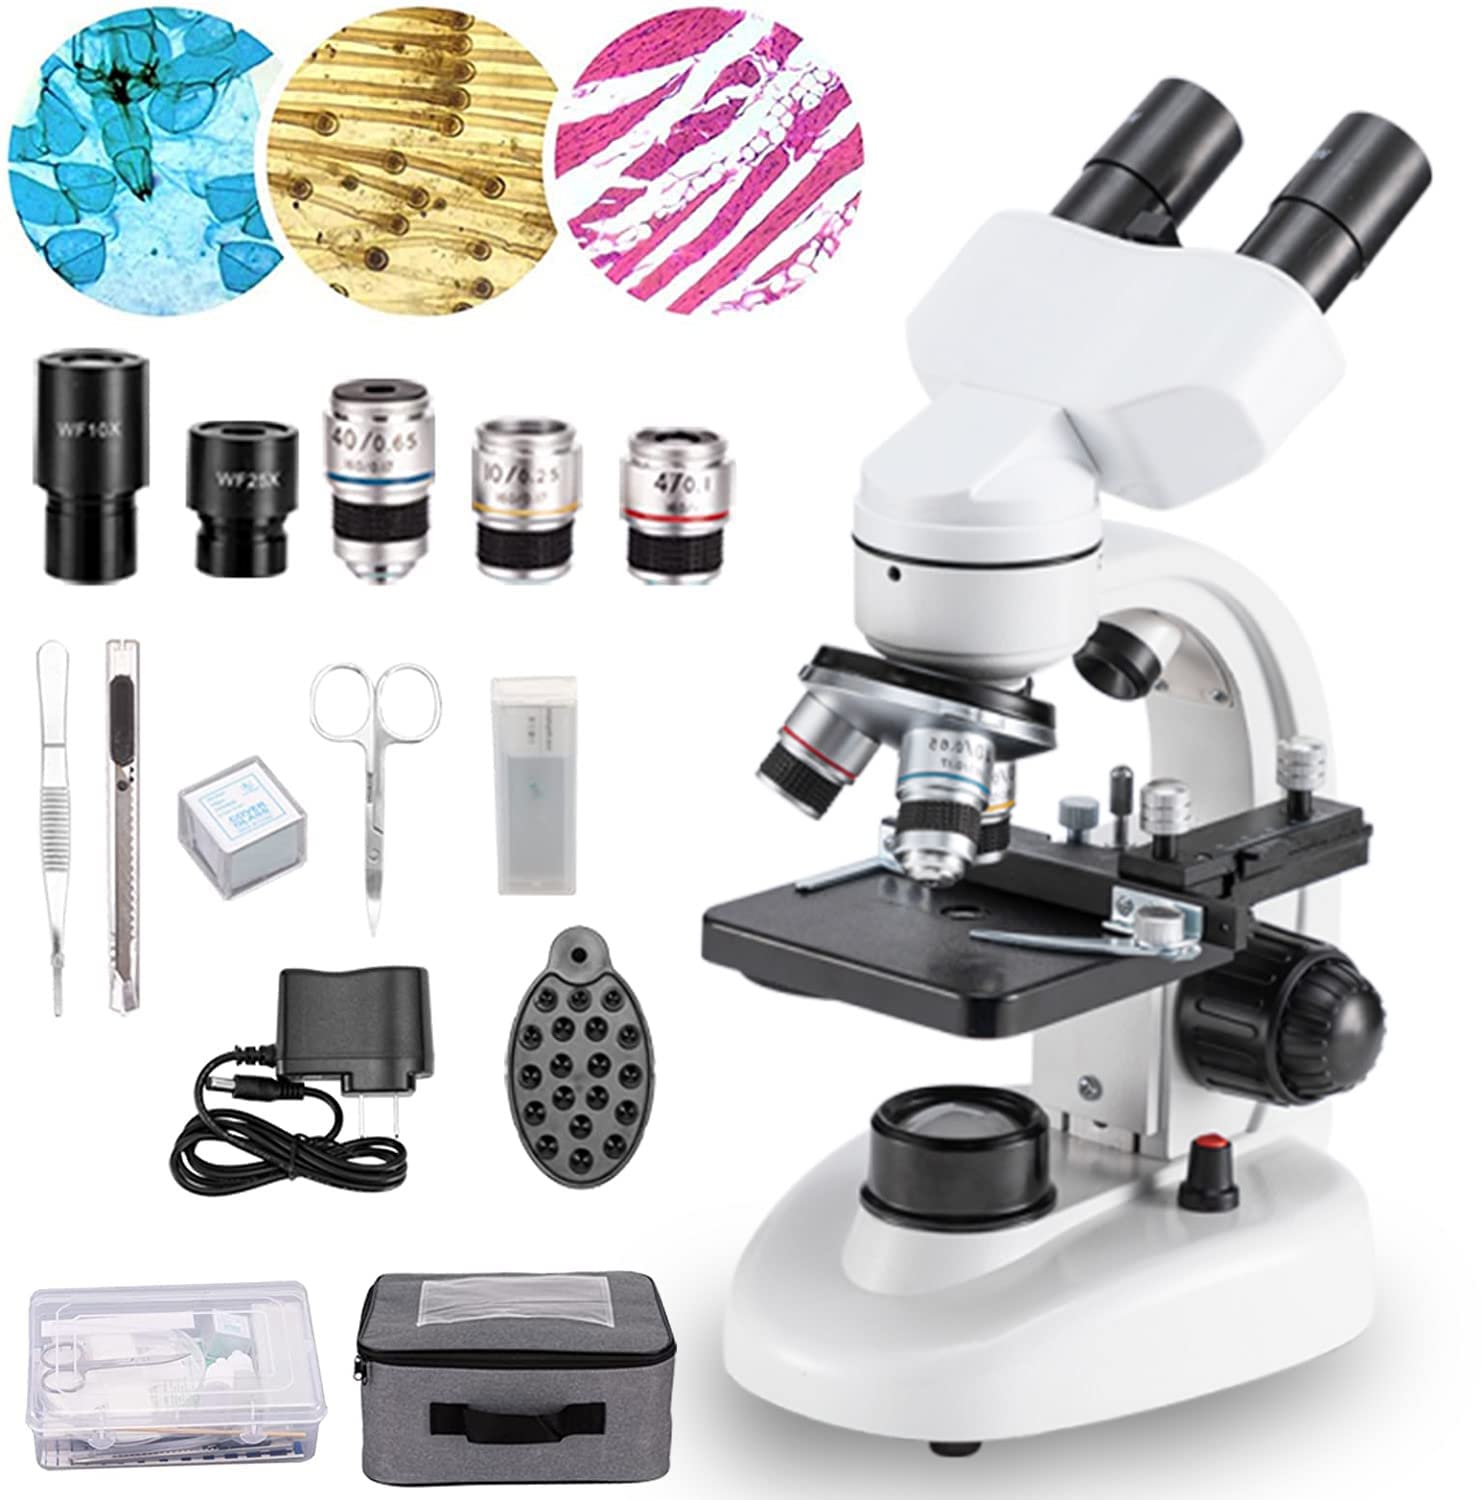 Compound Binocular Microscope,WF10x and WF25x Eyepieces,40X-2000X Magnification, LED Illumination Two-Layer Mechanical Stage,Microscope for Adults…